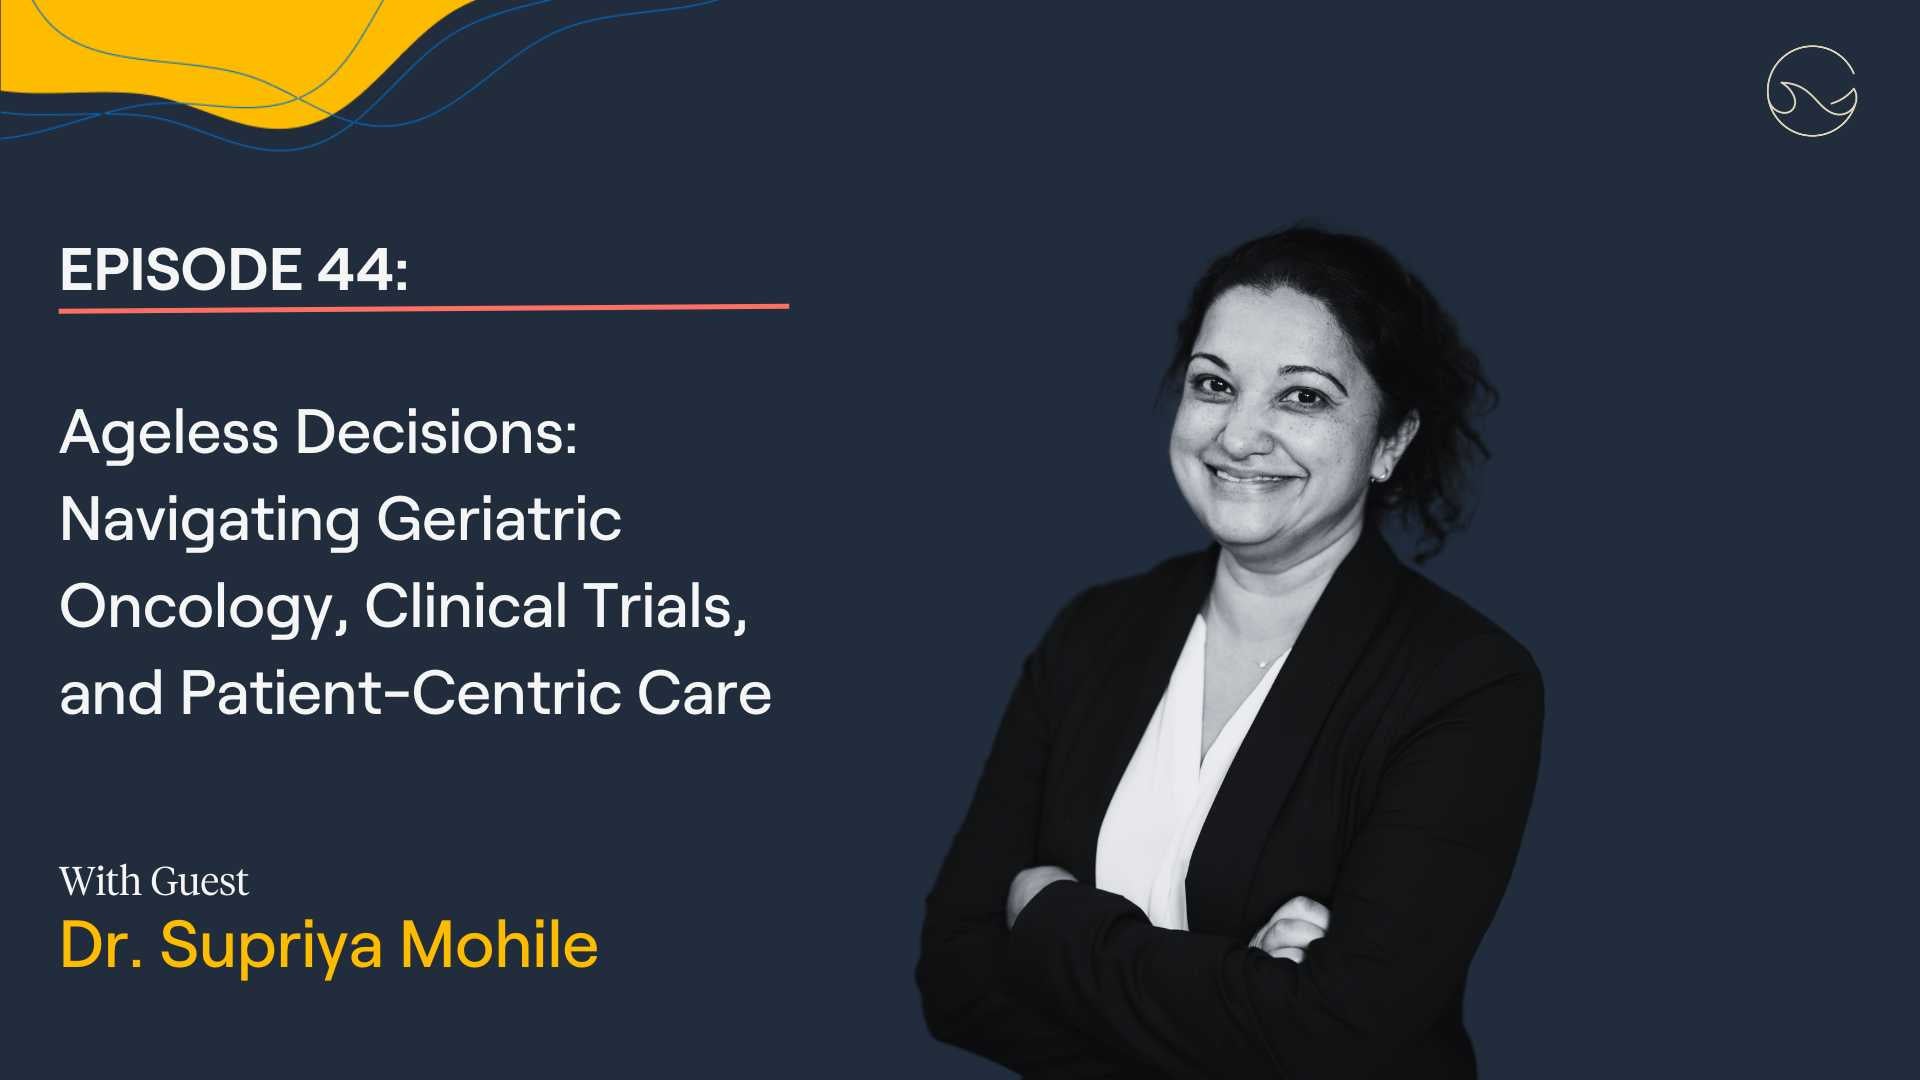 Load video: In this episode, Dr. Supriya Mohile discusses the need for geriatric oncology and the underrepresentation of older adults in clinical trials.